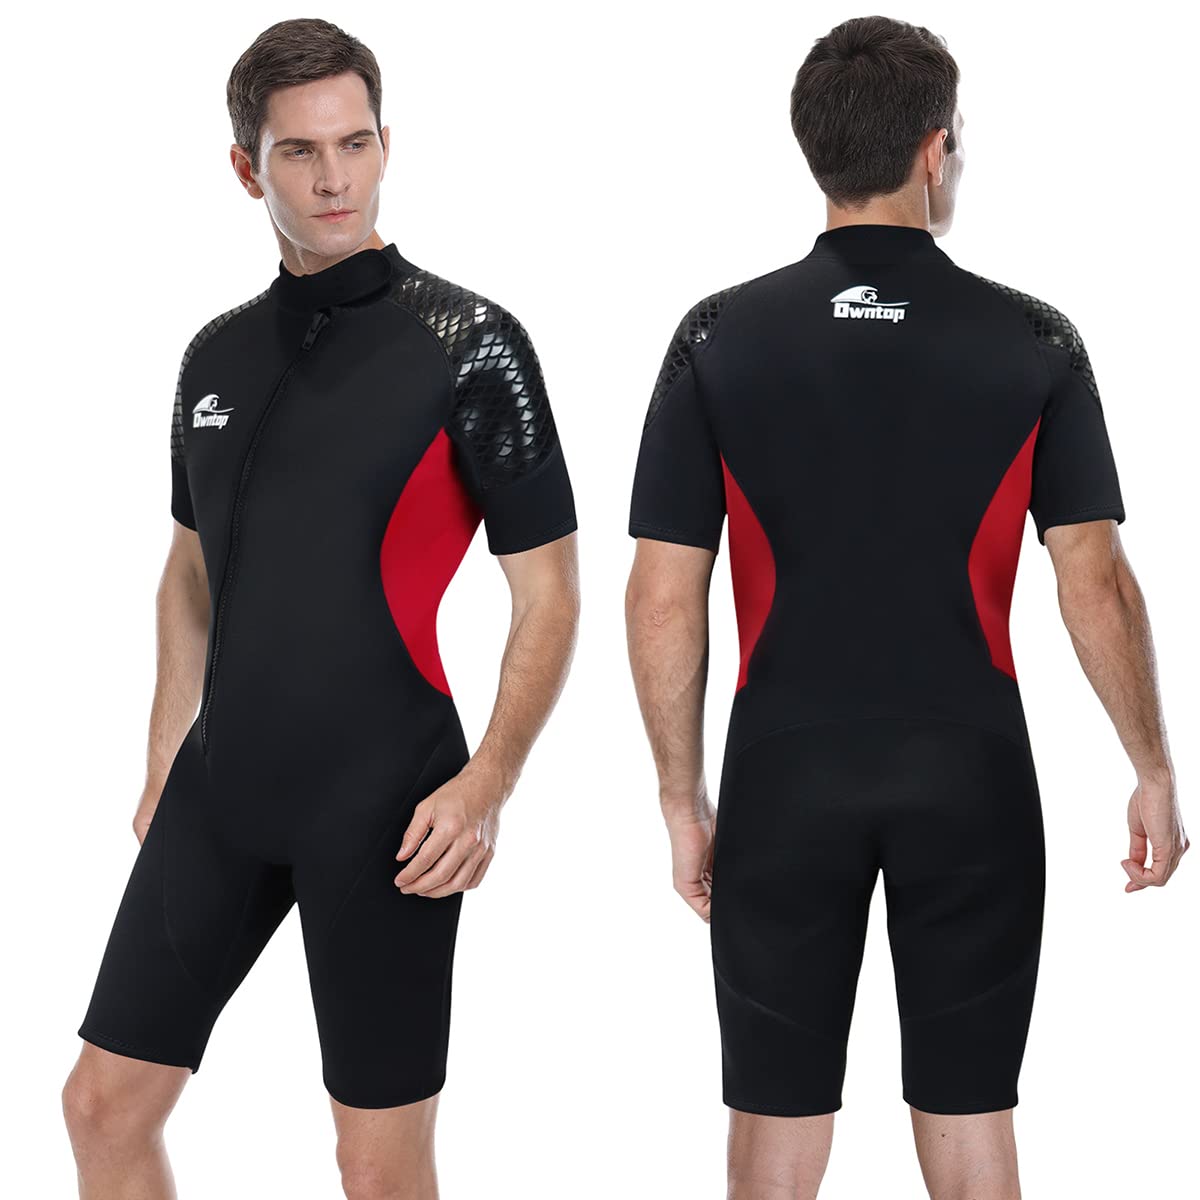 Owntop 3mm Shorty Wetsuit for Men - Neoprene Diving Suits Stretch